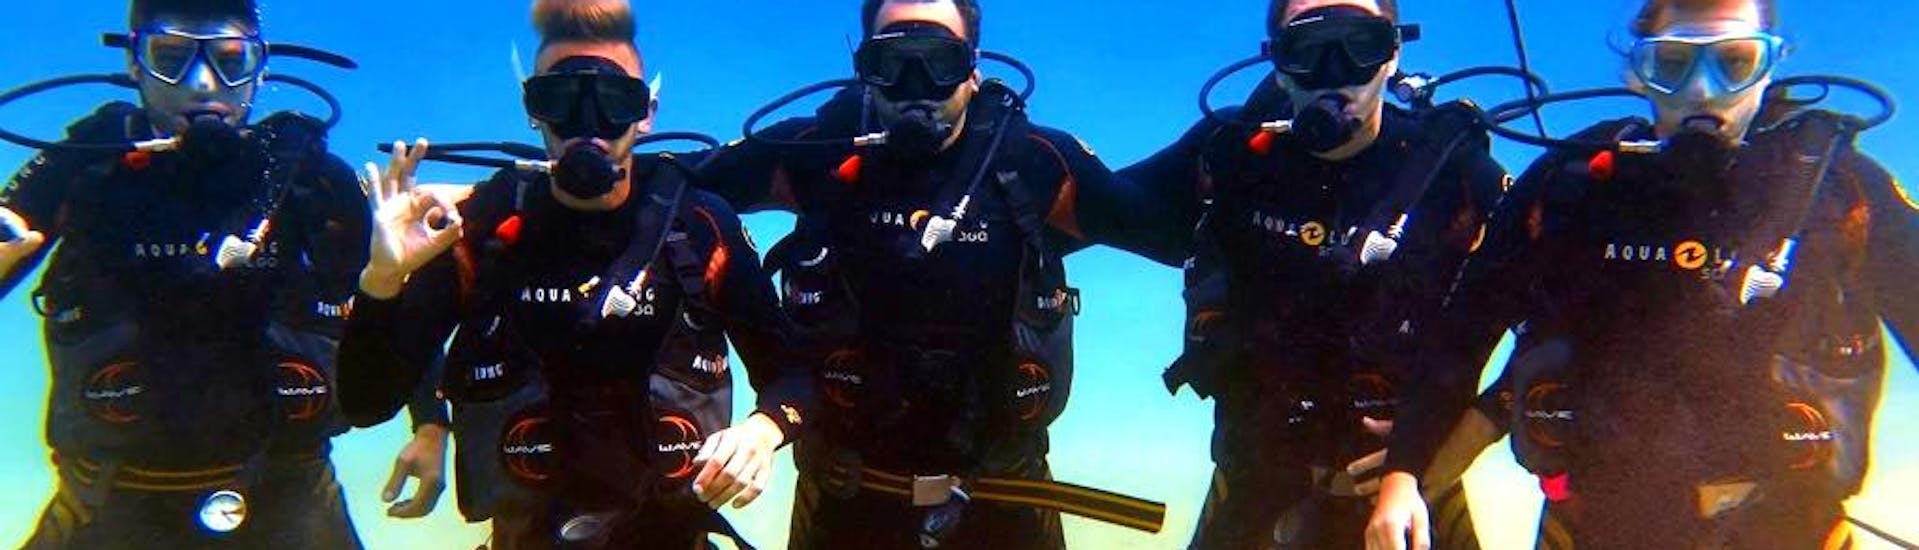 A group of divers having fun on their Scuba Diving Course for Beginners - PADI Open Water Diver together with the experienced instructors from Evelin Dive Center.